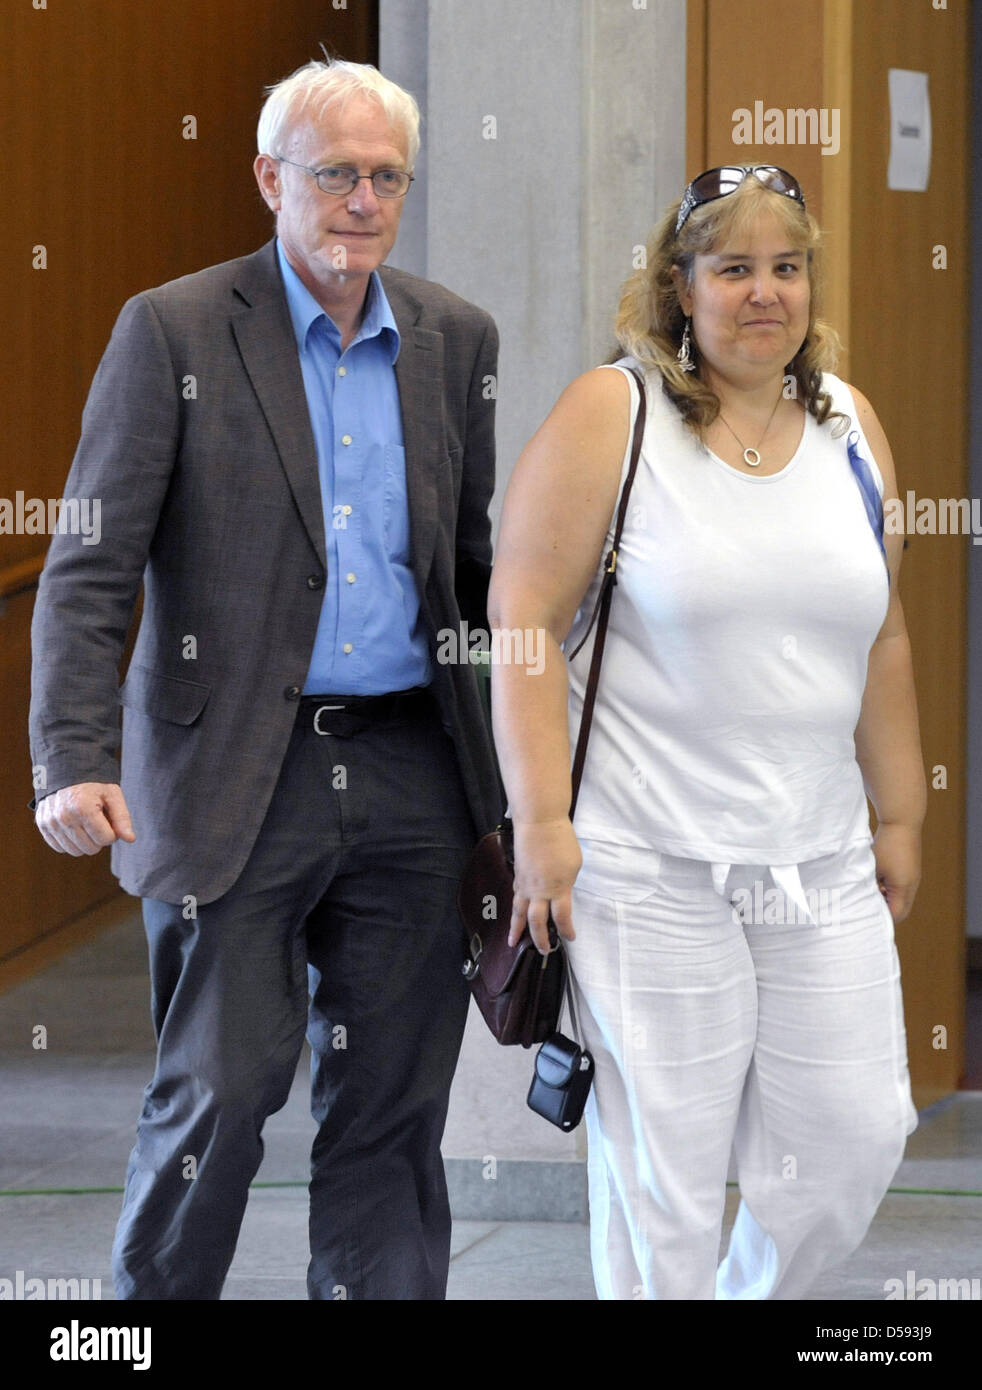 Cashier 'Emmely' and her lawyer Benedikt Hopmann pictured in the Federal Labour Court in Erfurt, Germany, 10 June 2010. Her dismissal because of 1.30 euros will be reviewd at the court. The judges have to decide whether the dismissal because of 1.30 euros worth of left-over deposit was proportional. The 52-year-old was dismissed with immediate effect due to the breach of trust. Pho Stock Photo